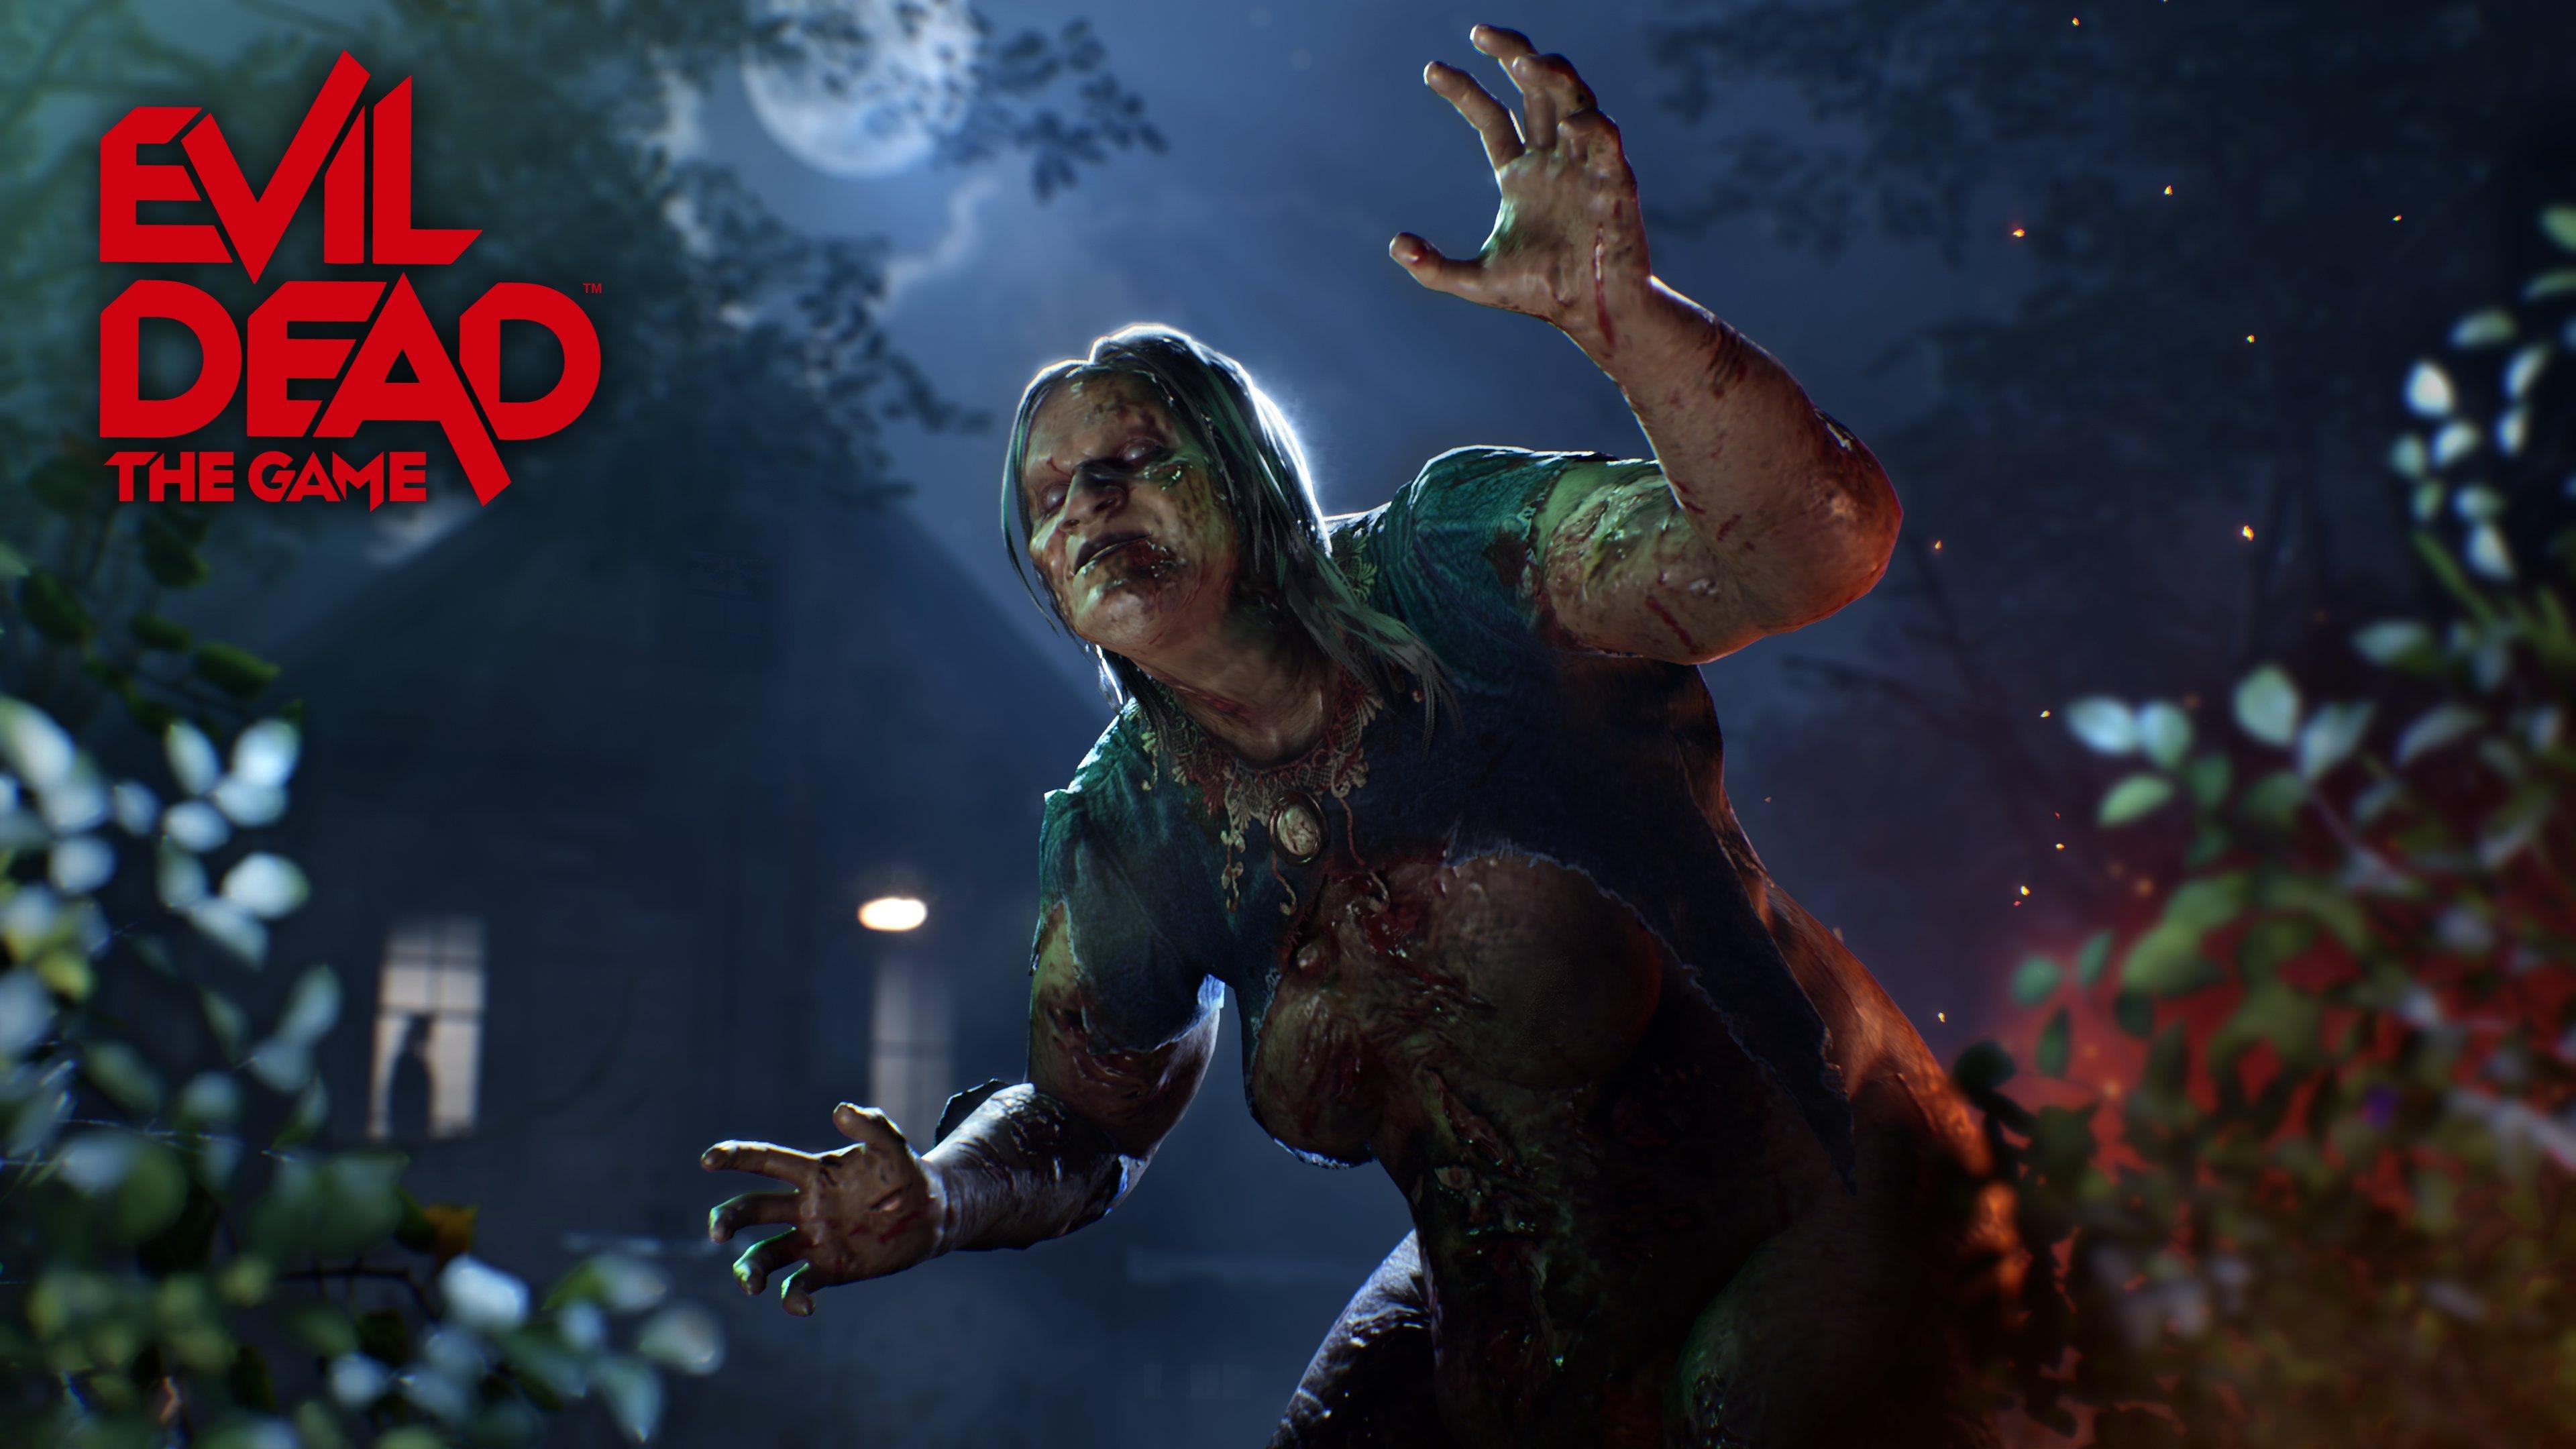 Will Evil Dead: The Game be on Xbox Game Pass or PlayStation Now?